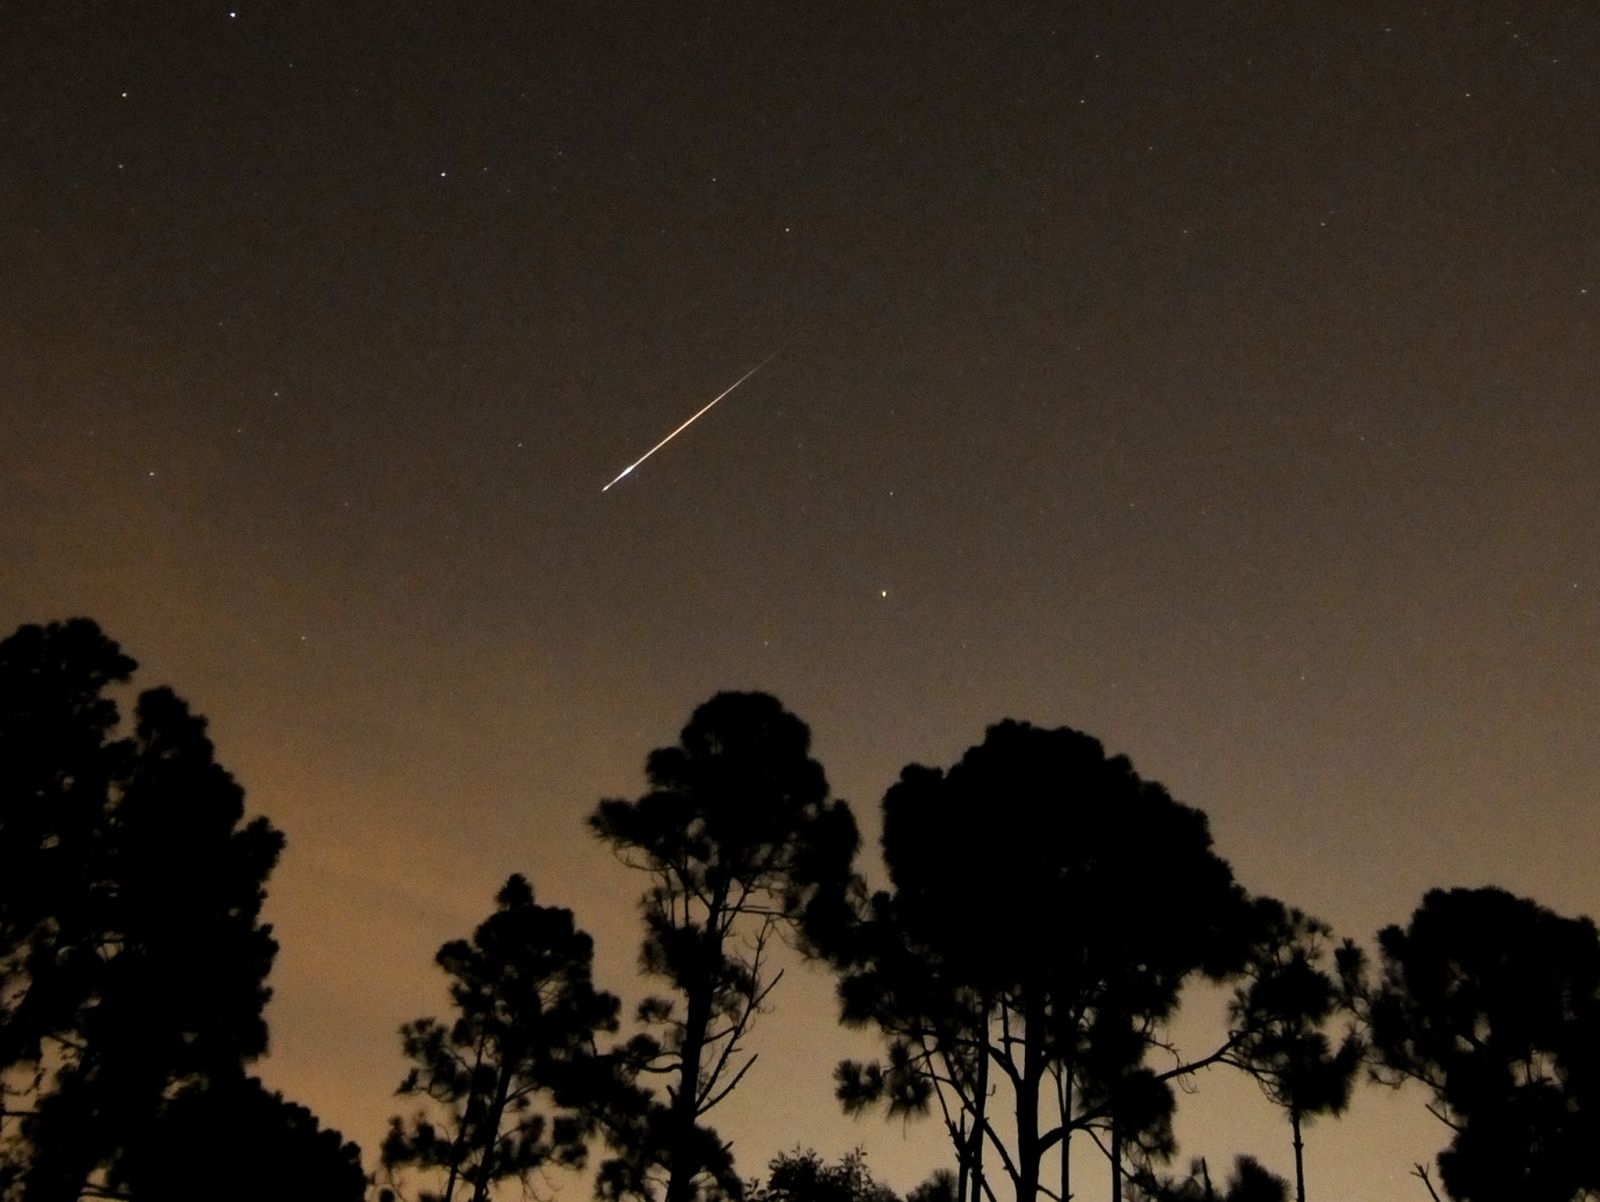 A Perseid meteor streaks towards the horizon during the annual Persied meteor shower in Palm Beach Gardens